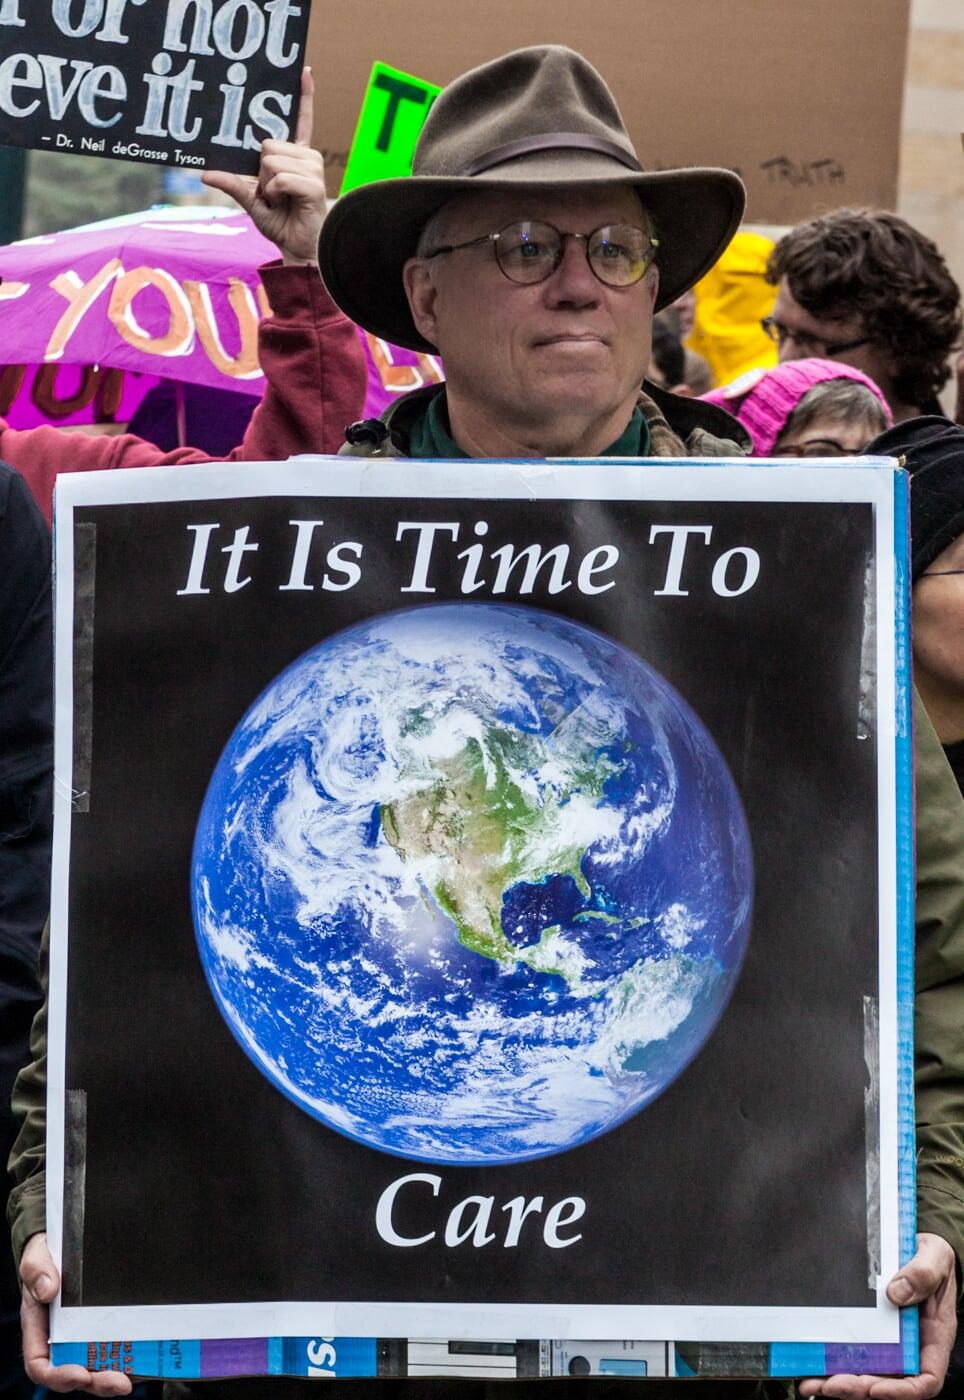 Man in brown felt hat and glasses, at a rally, holding a sign reading "It is Time to Care" with a picture of planet Earth.